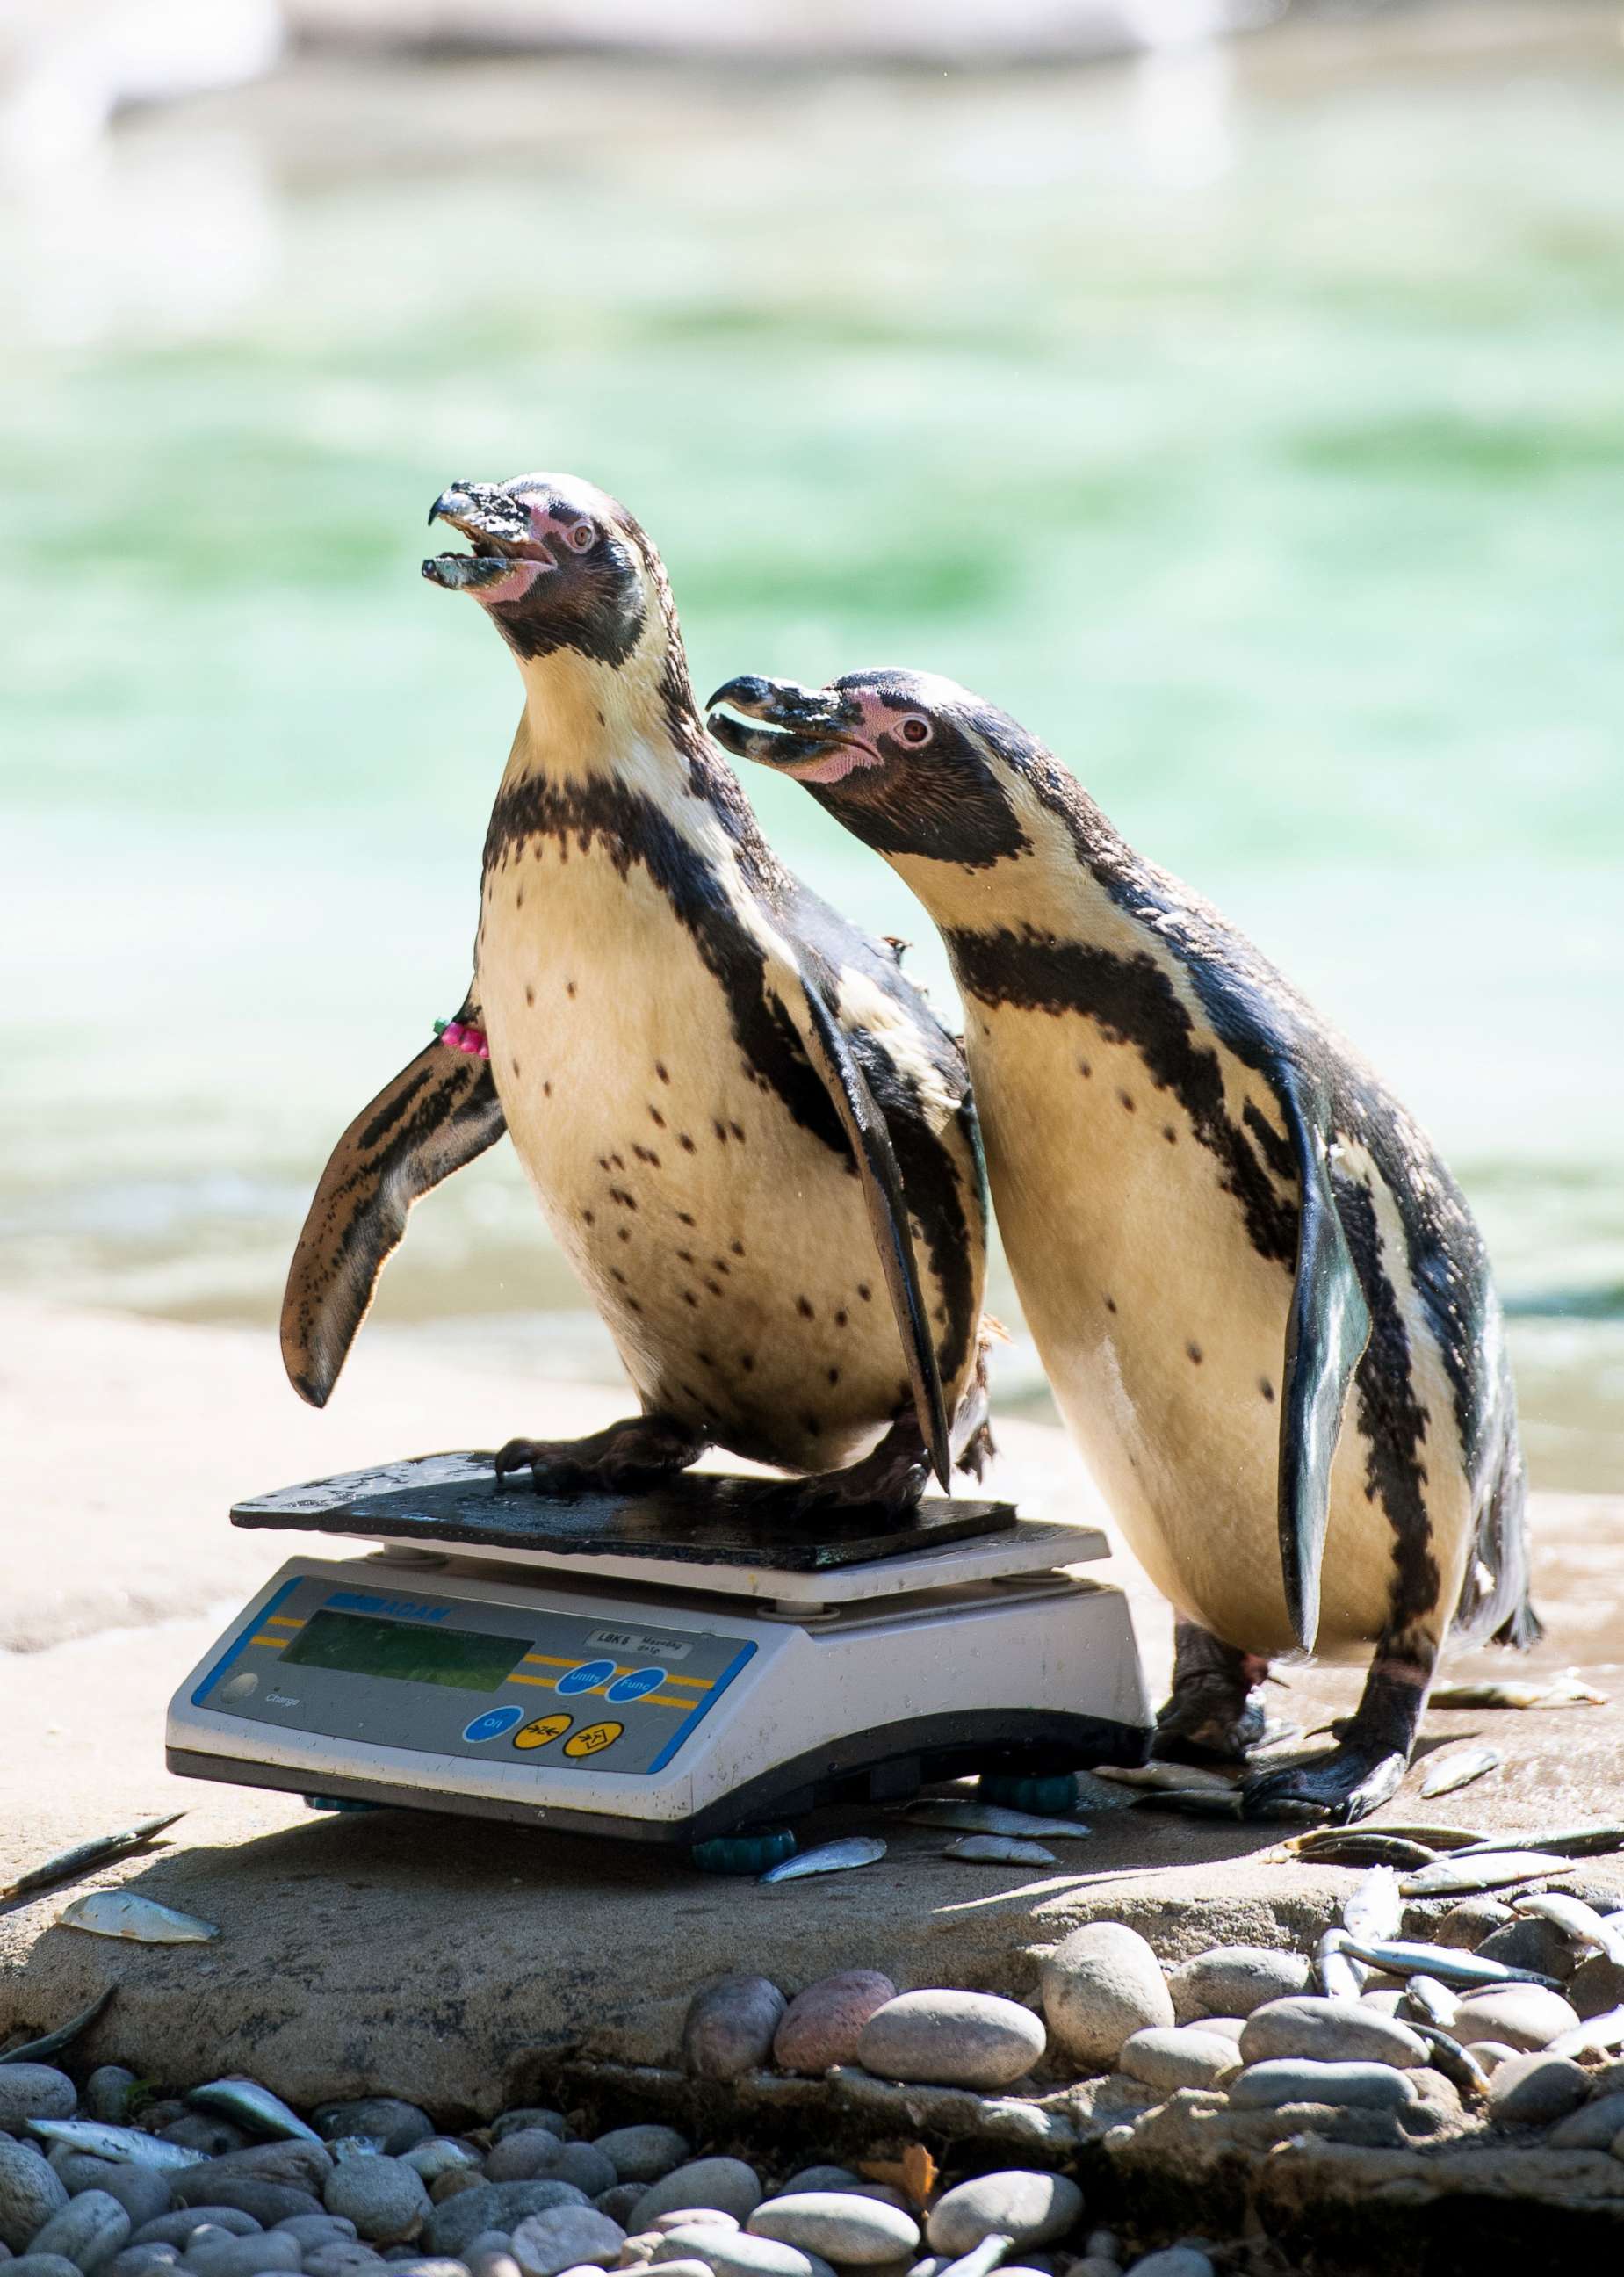 PHOTO: Humboldt Penguins stand on a set of scales during the annual weigh-in at ZSL London Zoo, London, Aug. 22, 2019.